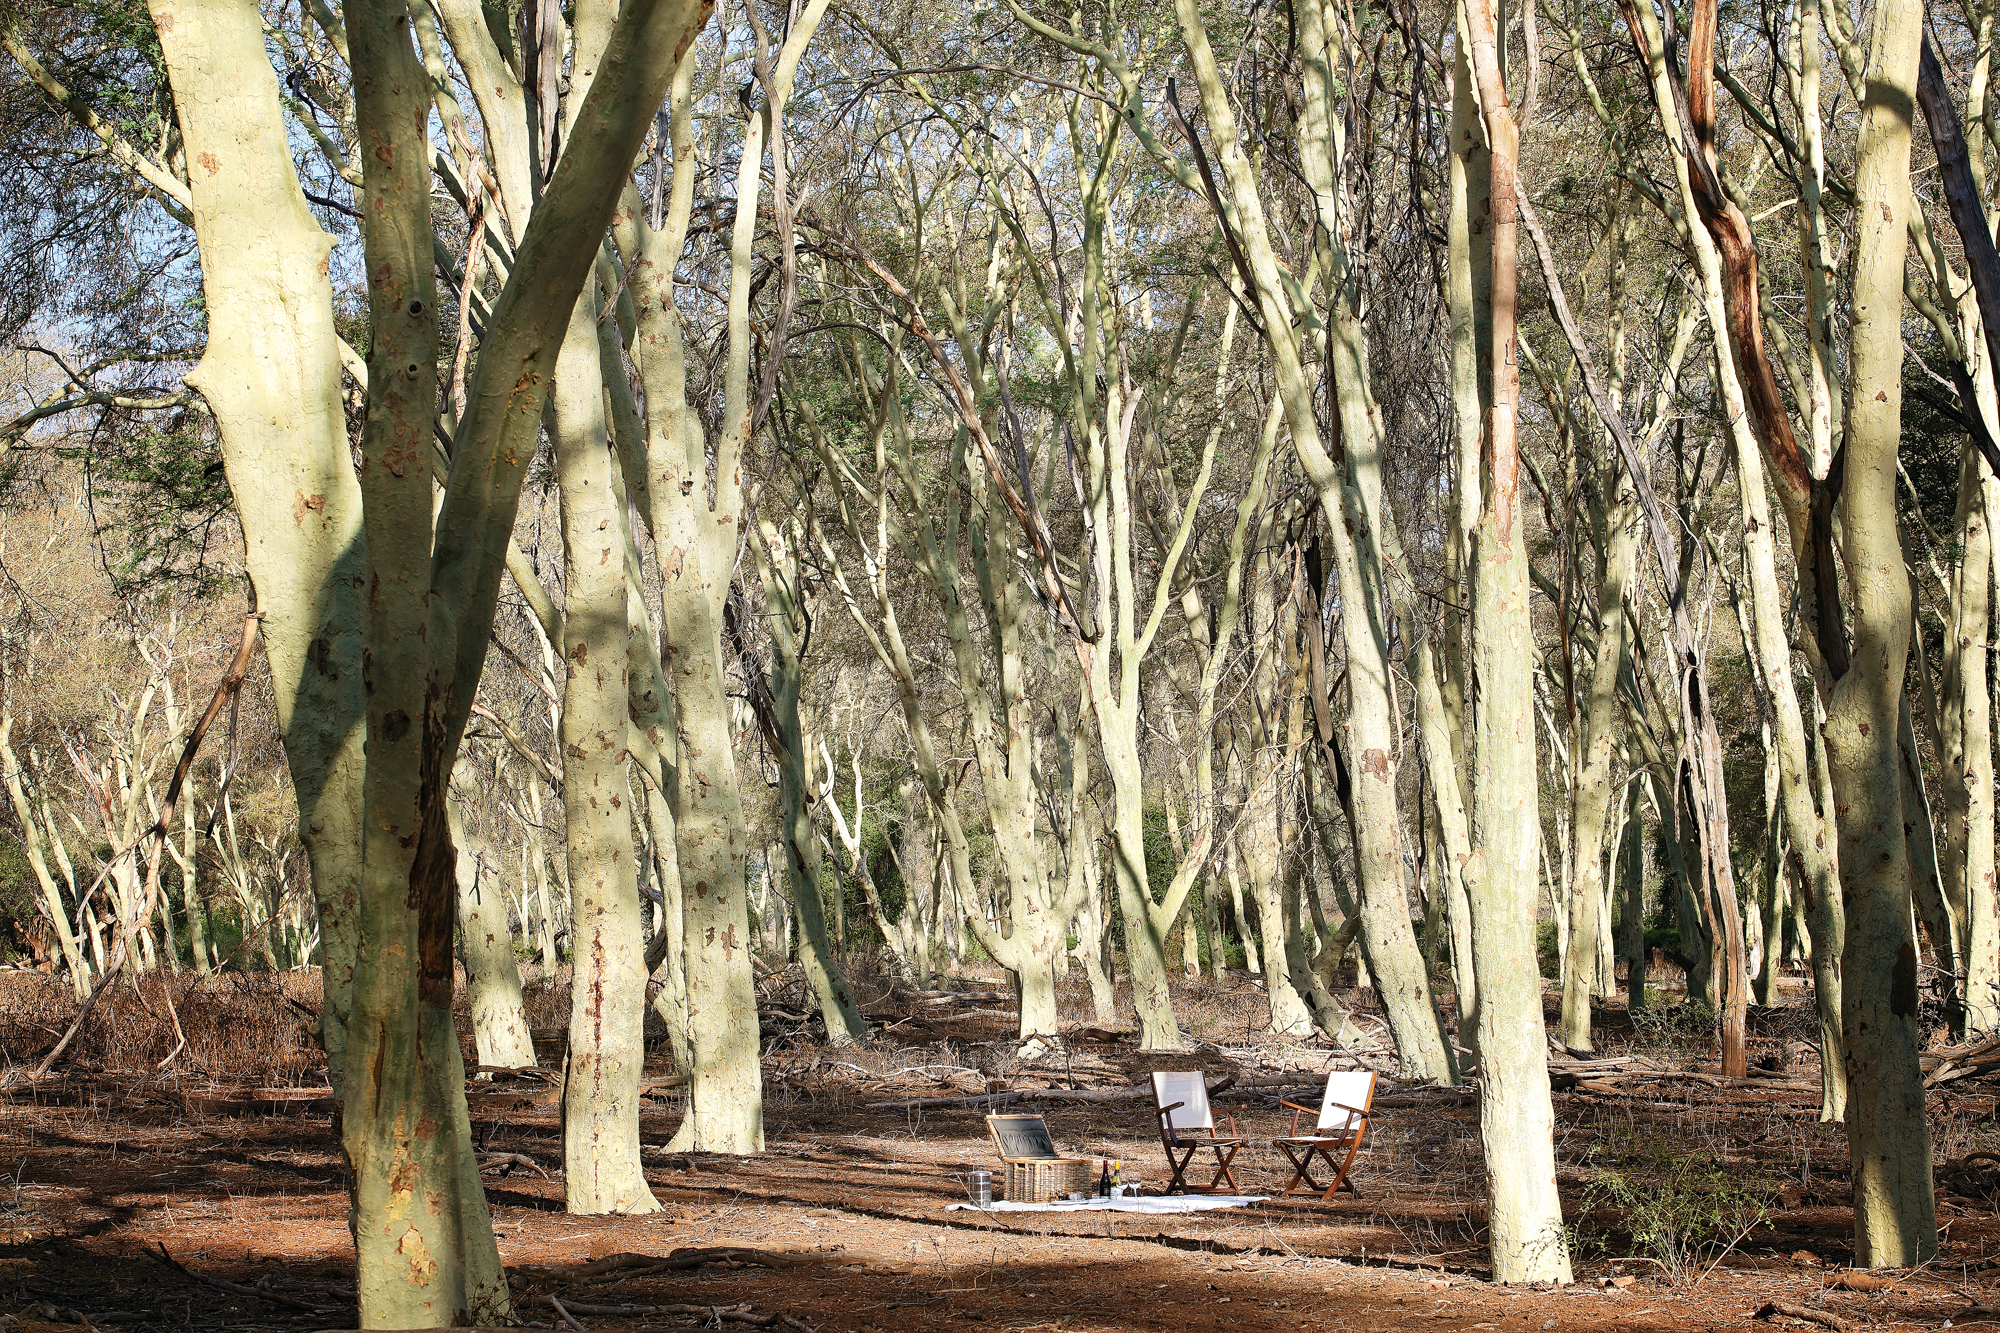 THE INCREDIBLE FEVER TREE FOREST